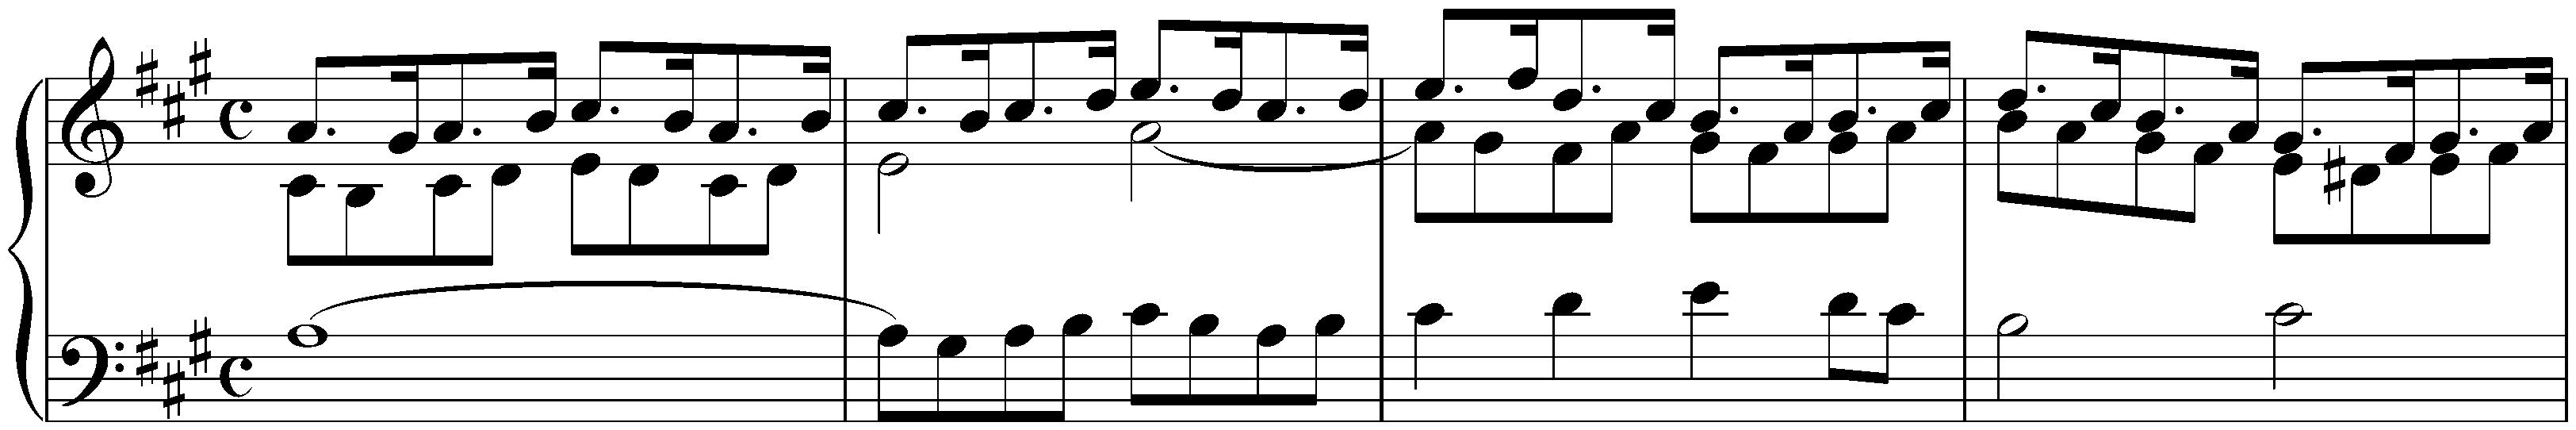 Prelude and Fugue in A major, BWV 896; 1. Prelude